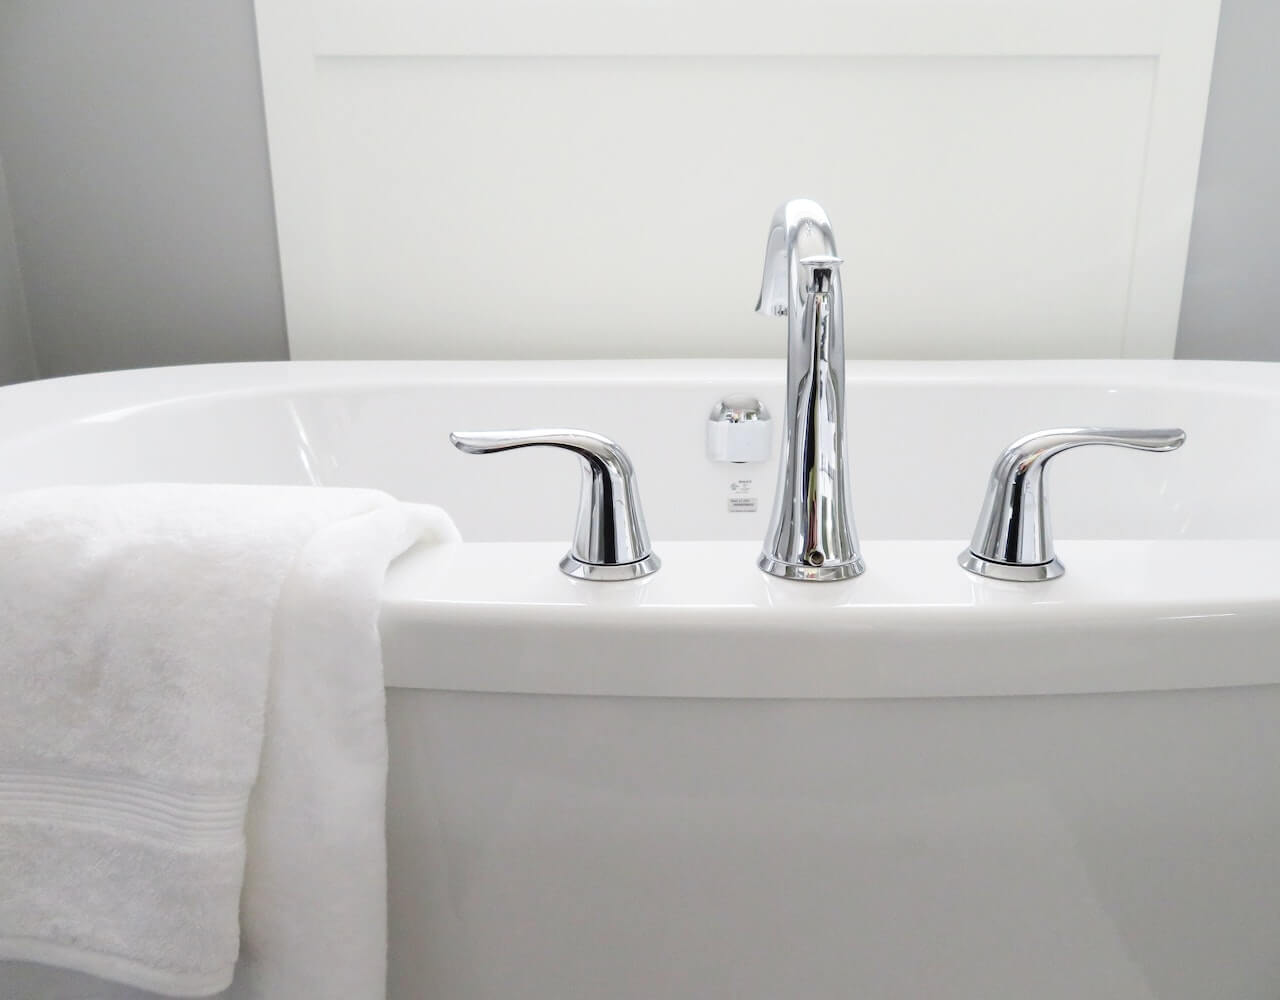 Remodeling Your Bathroom? Don’t Make These Mistakes